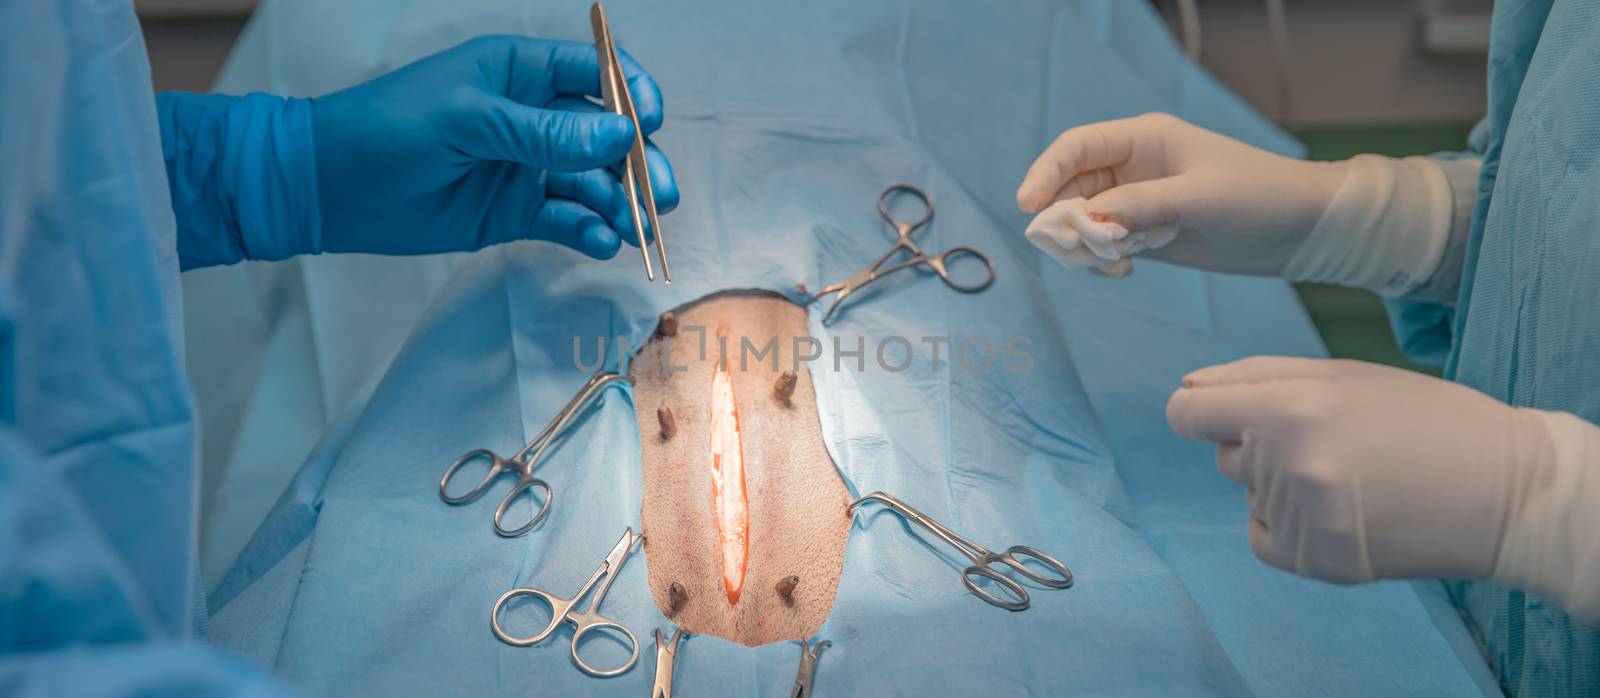 surgery on the abdomen of the animal in the operating room at veterinary clinic.